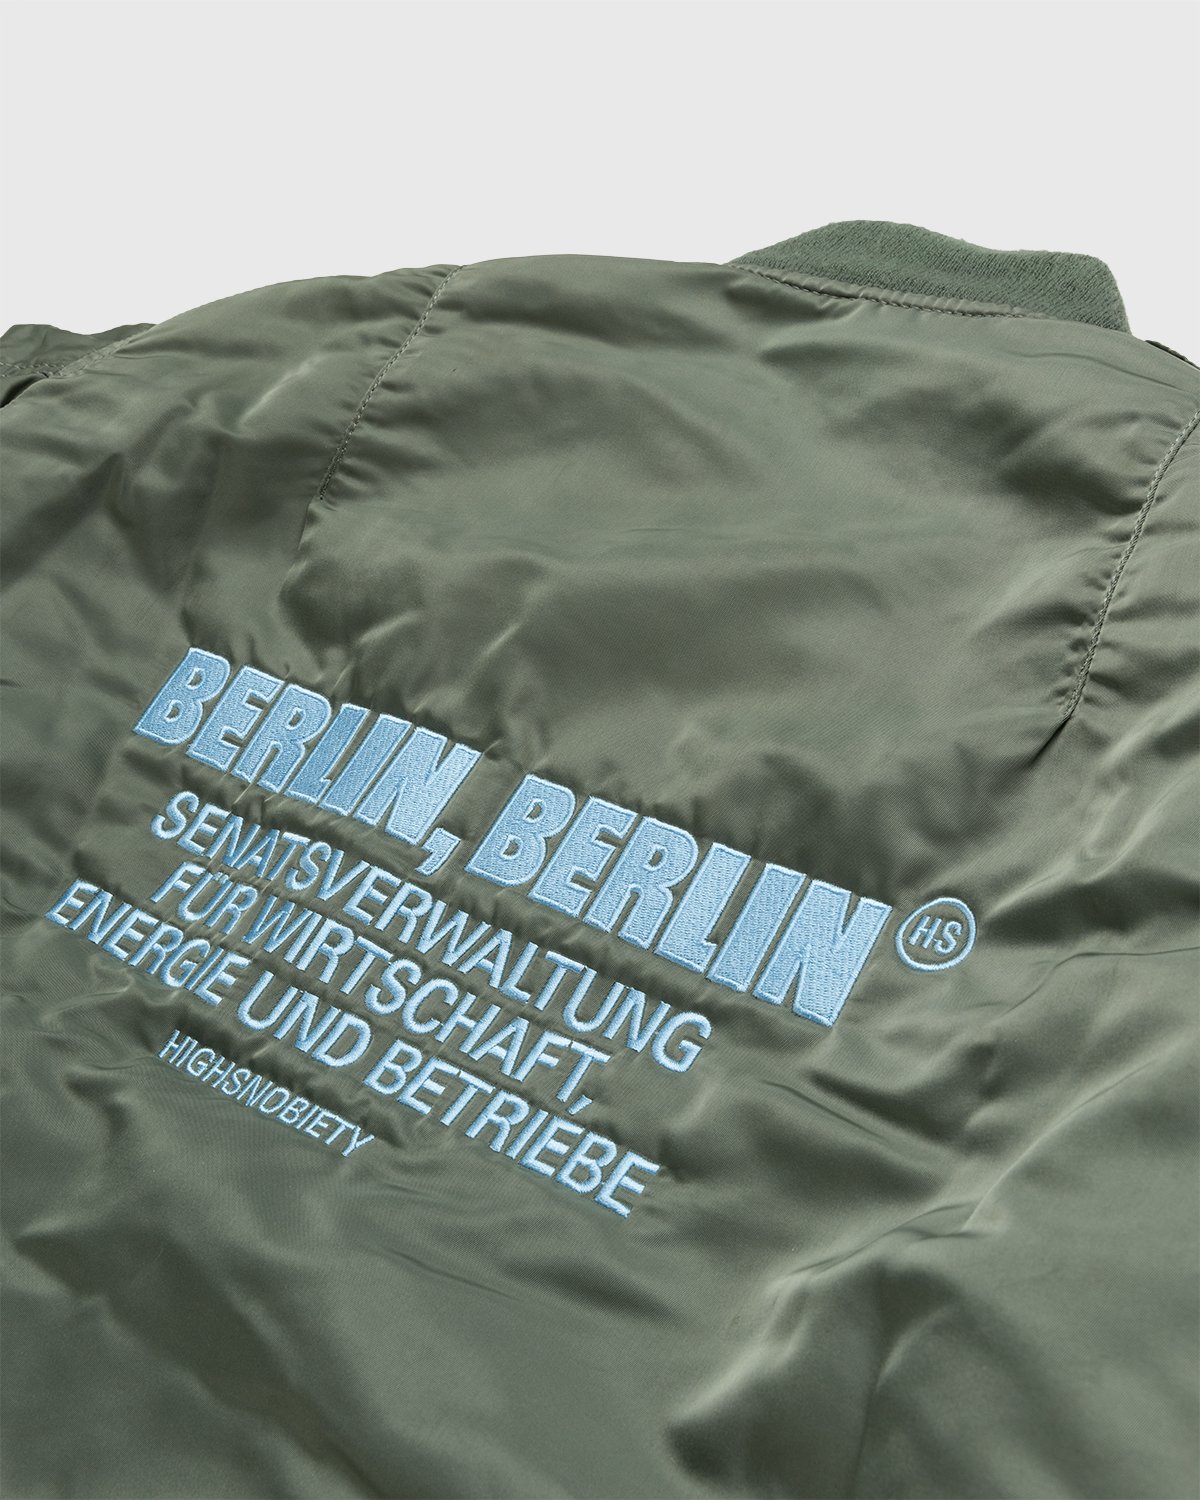 Highsnobiety - Berlin Berlin Embroidered Vintage MA-1 Green - Clothing - Green - Image 3